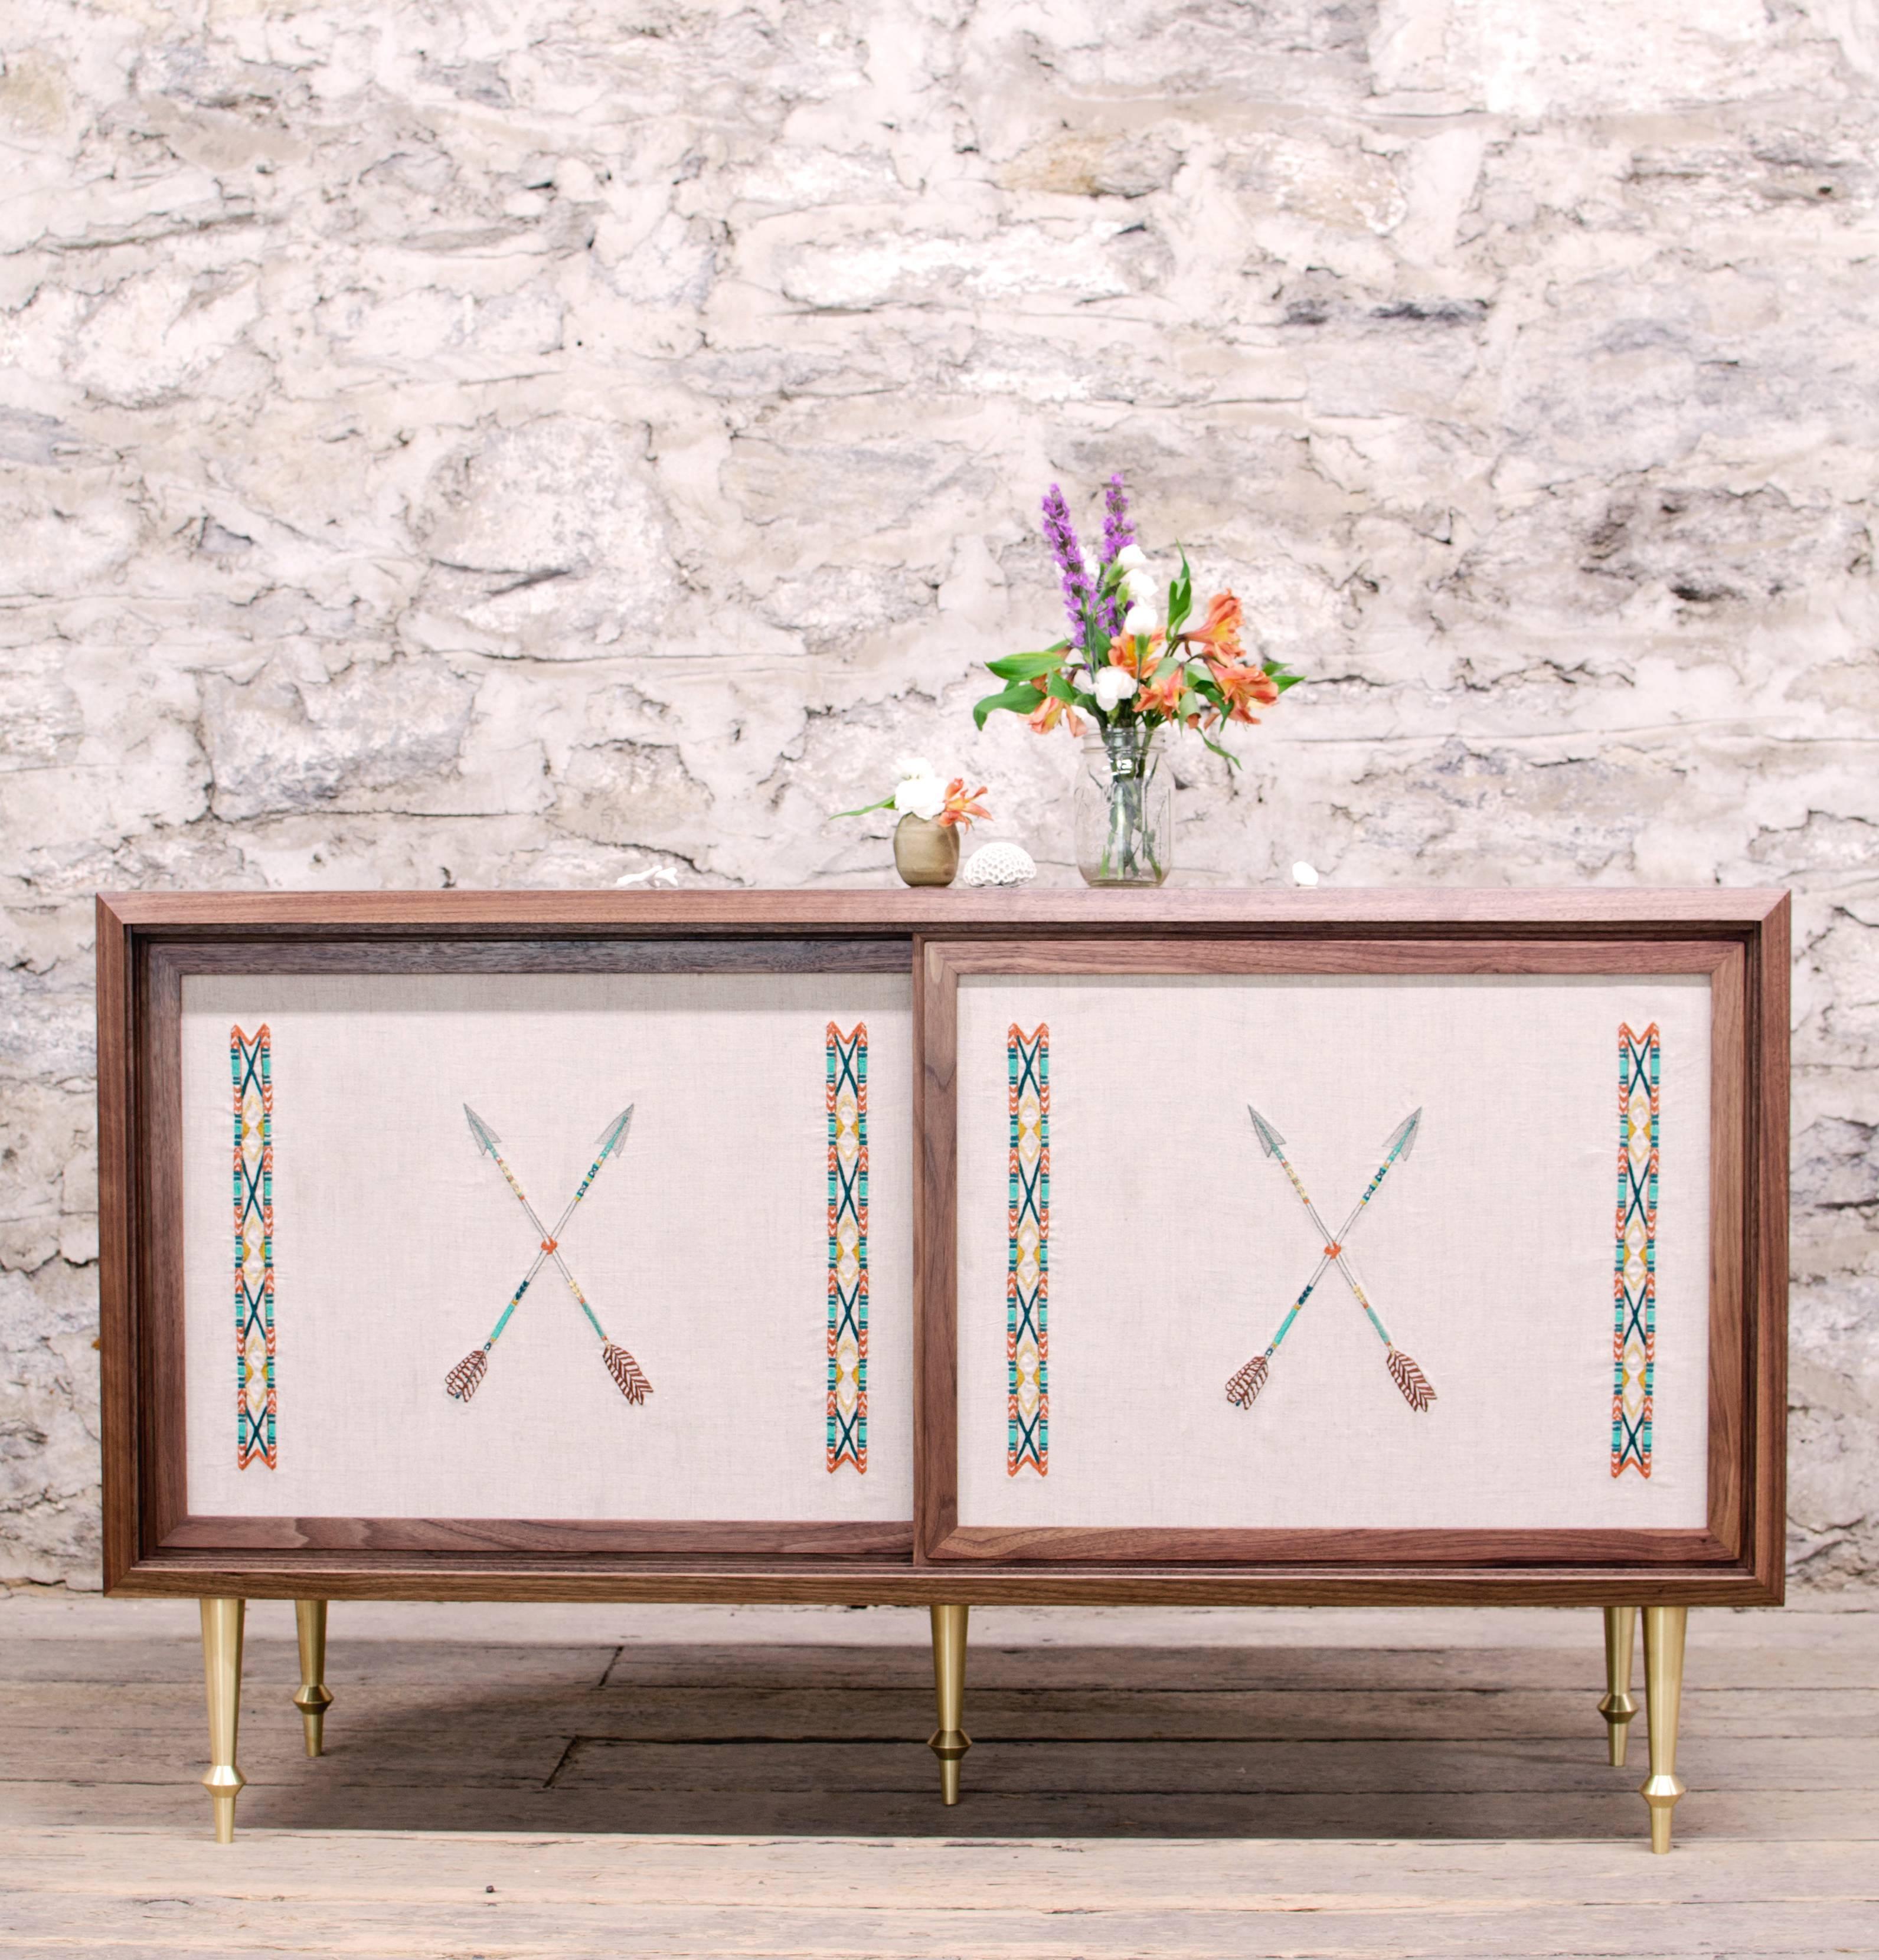 As shown:
Solid walnut with turned brass legs.
Sliding doors with exclusive Coral & Tusk embroidered linen panels.
Oil and wax finish.
Dimensions: 30” H x 52” W x 18” D.
Custom sizing and Coral & Tusk fabric options available.
Offered in a